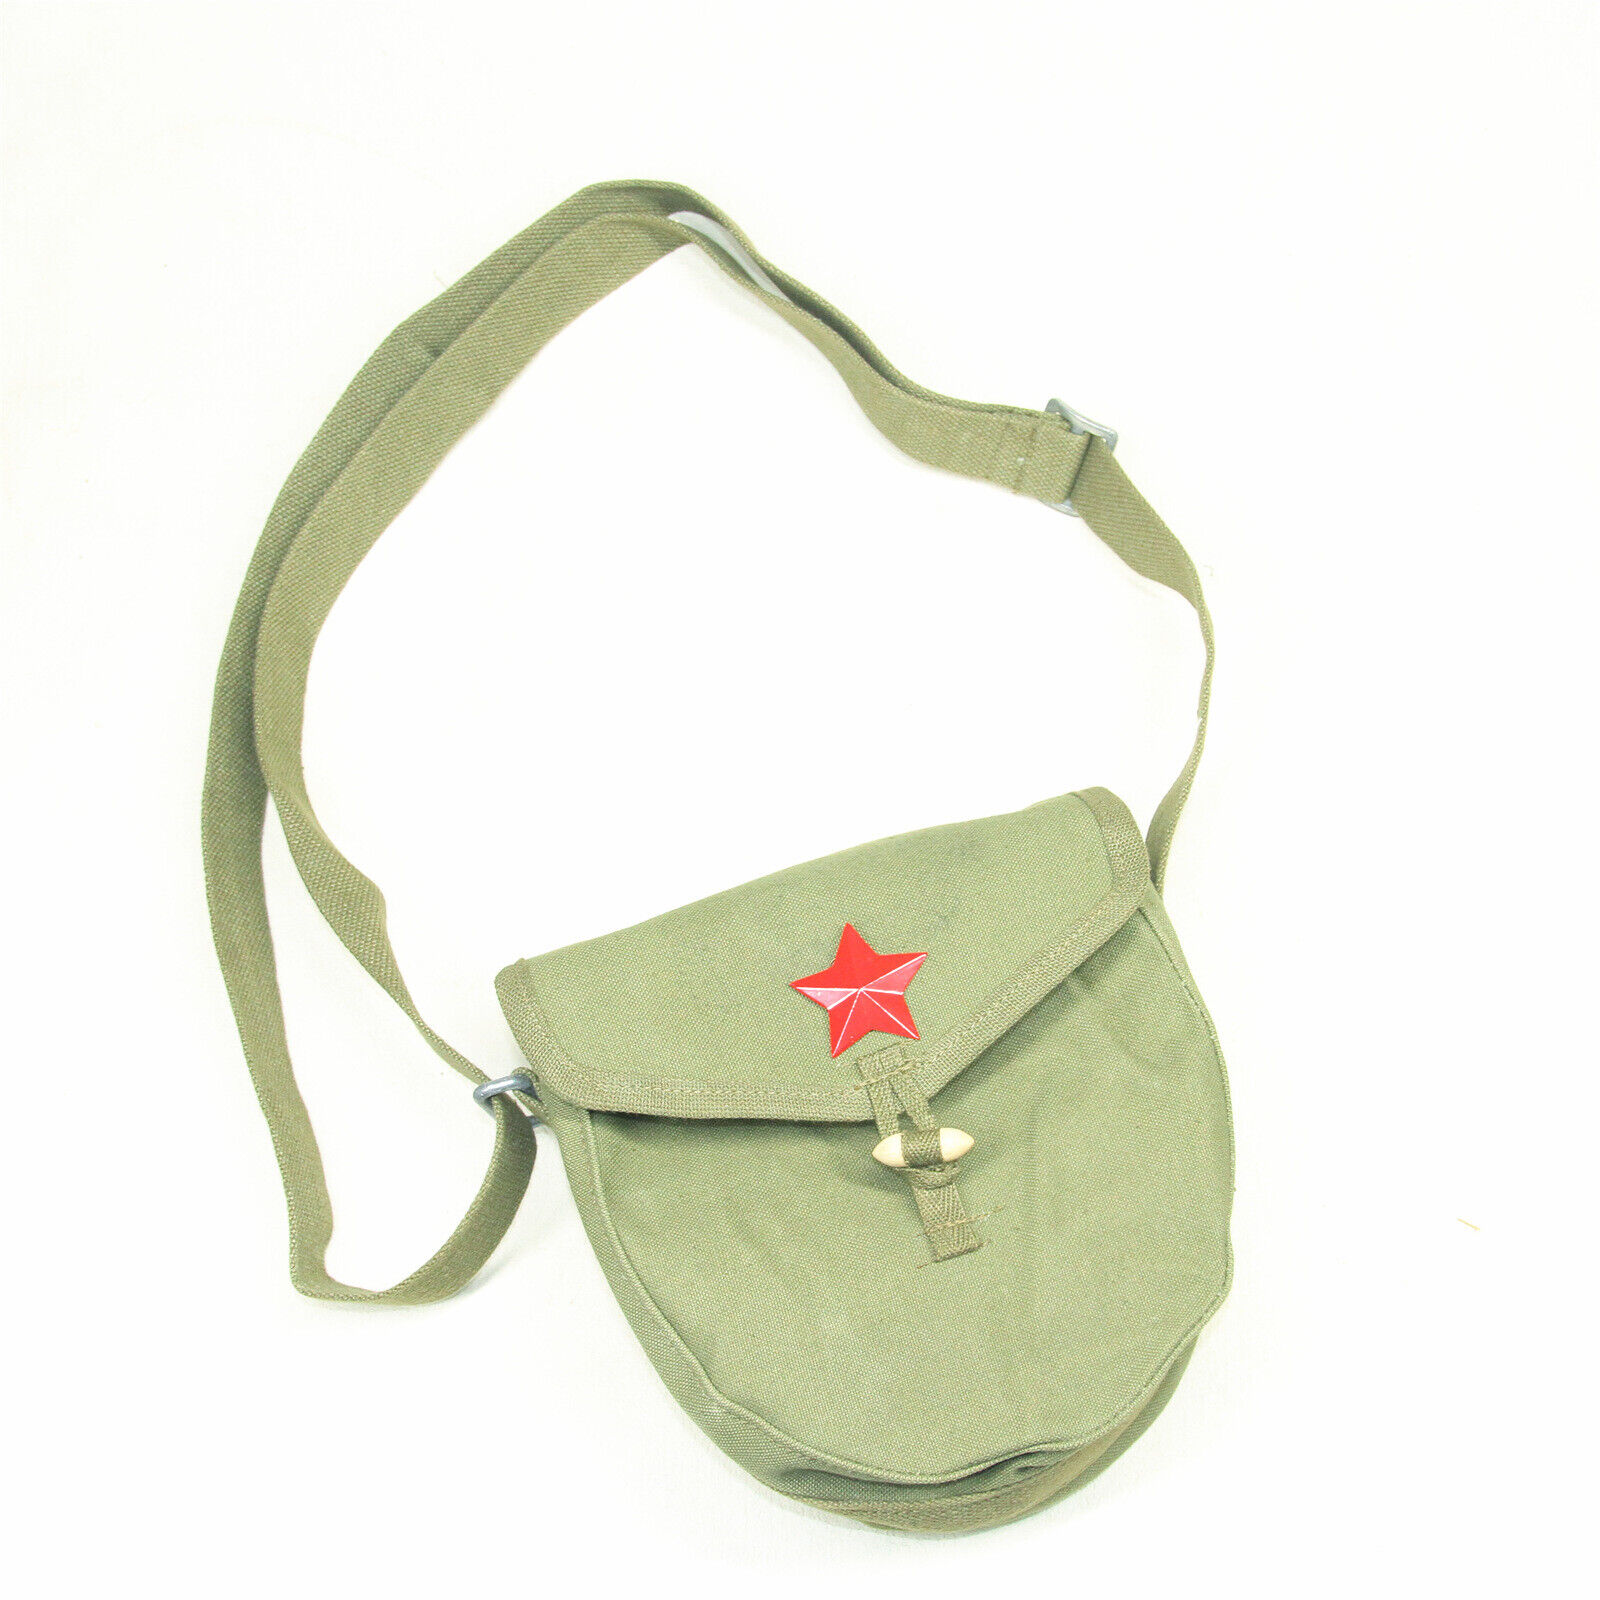 Surplus Chinese Army Round Canvas Shoulder Bag From The 1960s To The 1970s